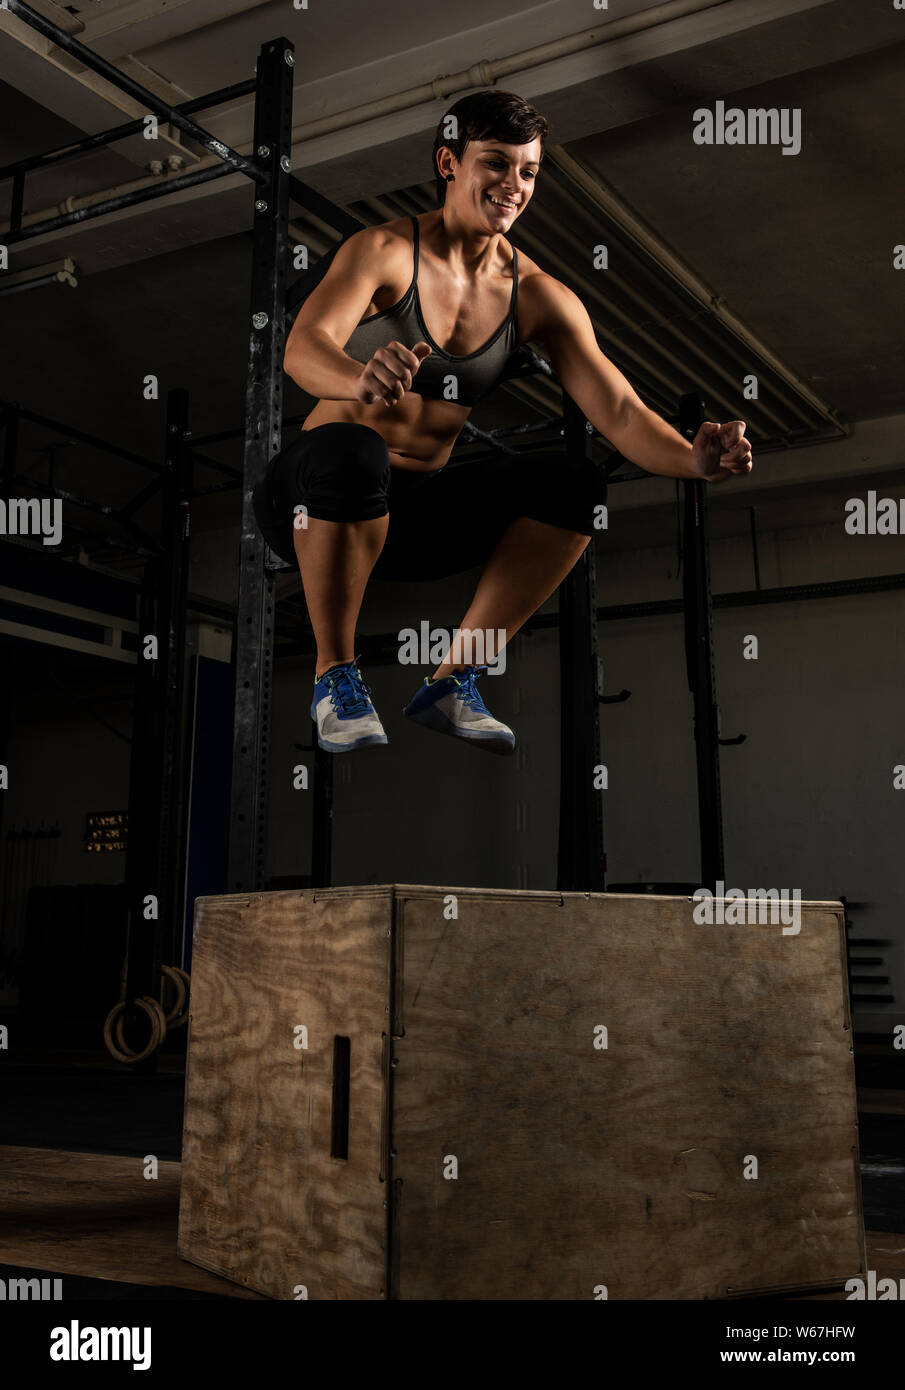 An athletic short haired woman with strong abs is doing box jumps in a gym. The female athlete is smiling and jumping on the box. Black and white. Stock Photo